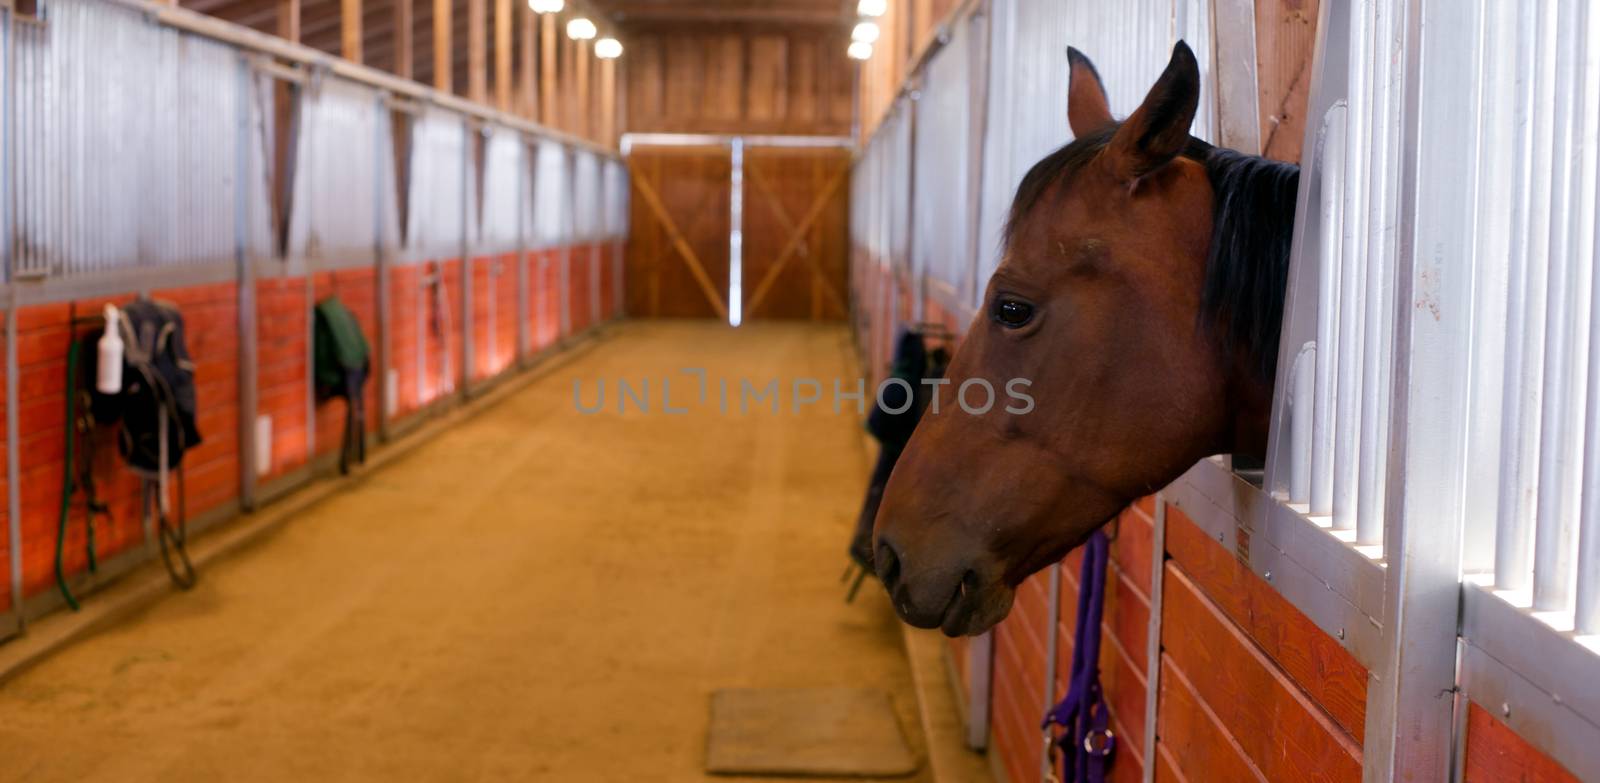 Horse looks out at the equestrian stables after eating